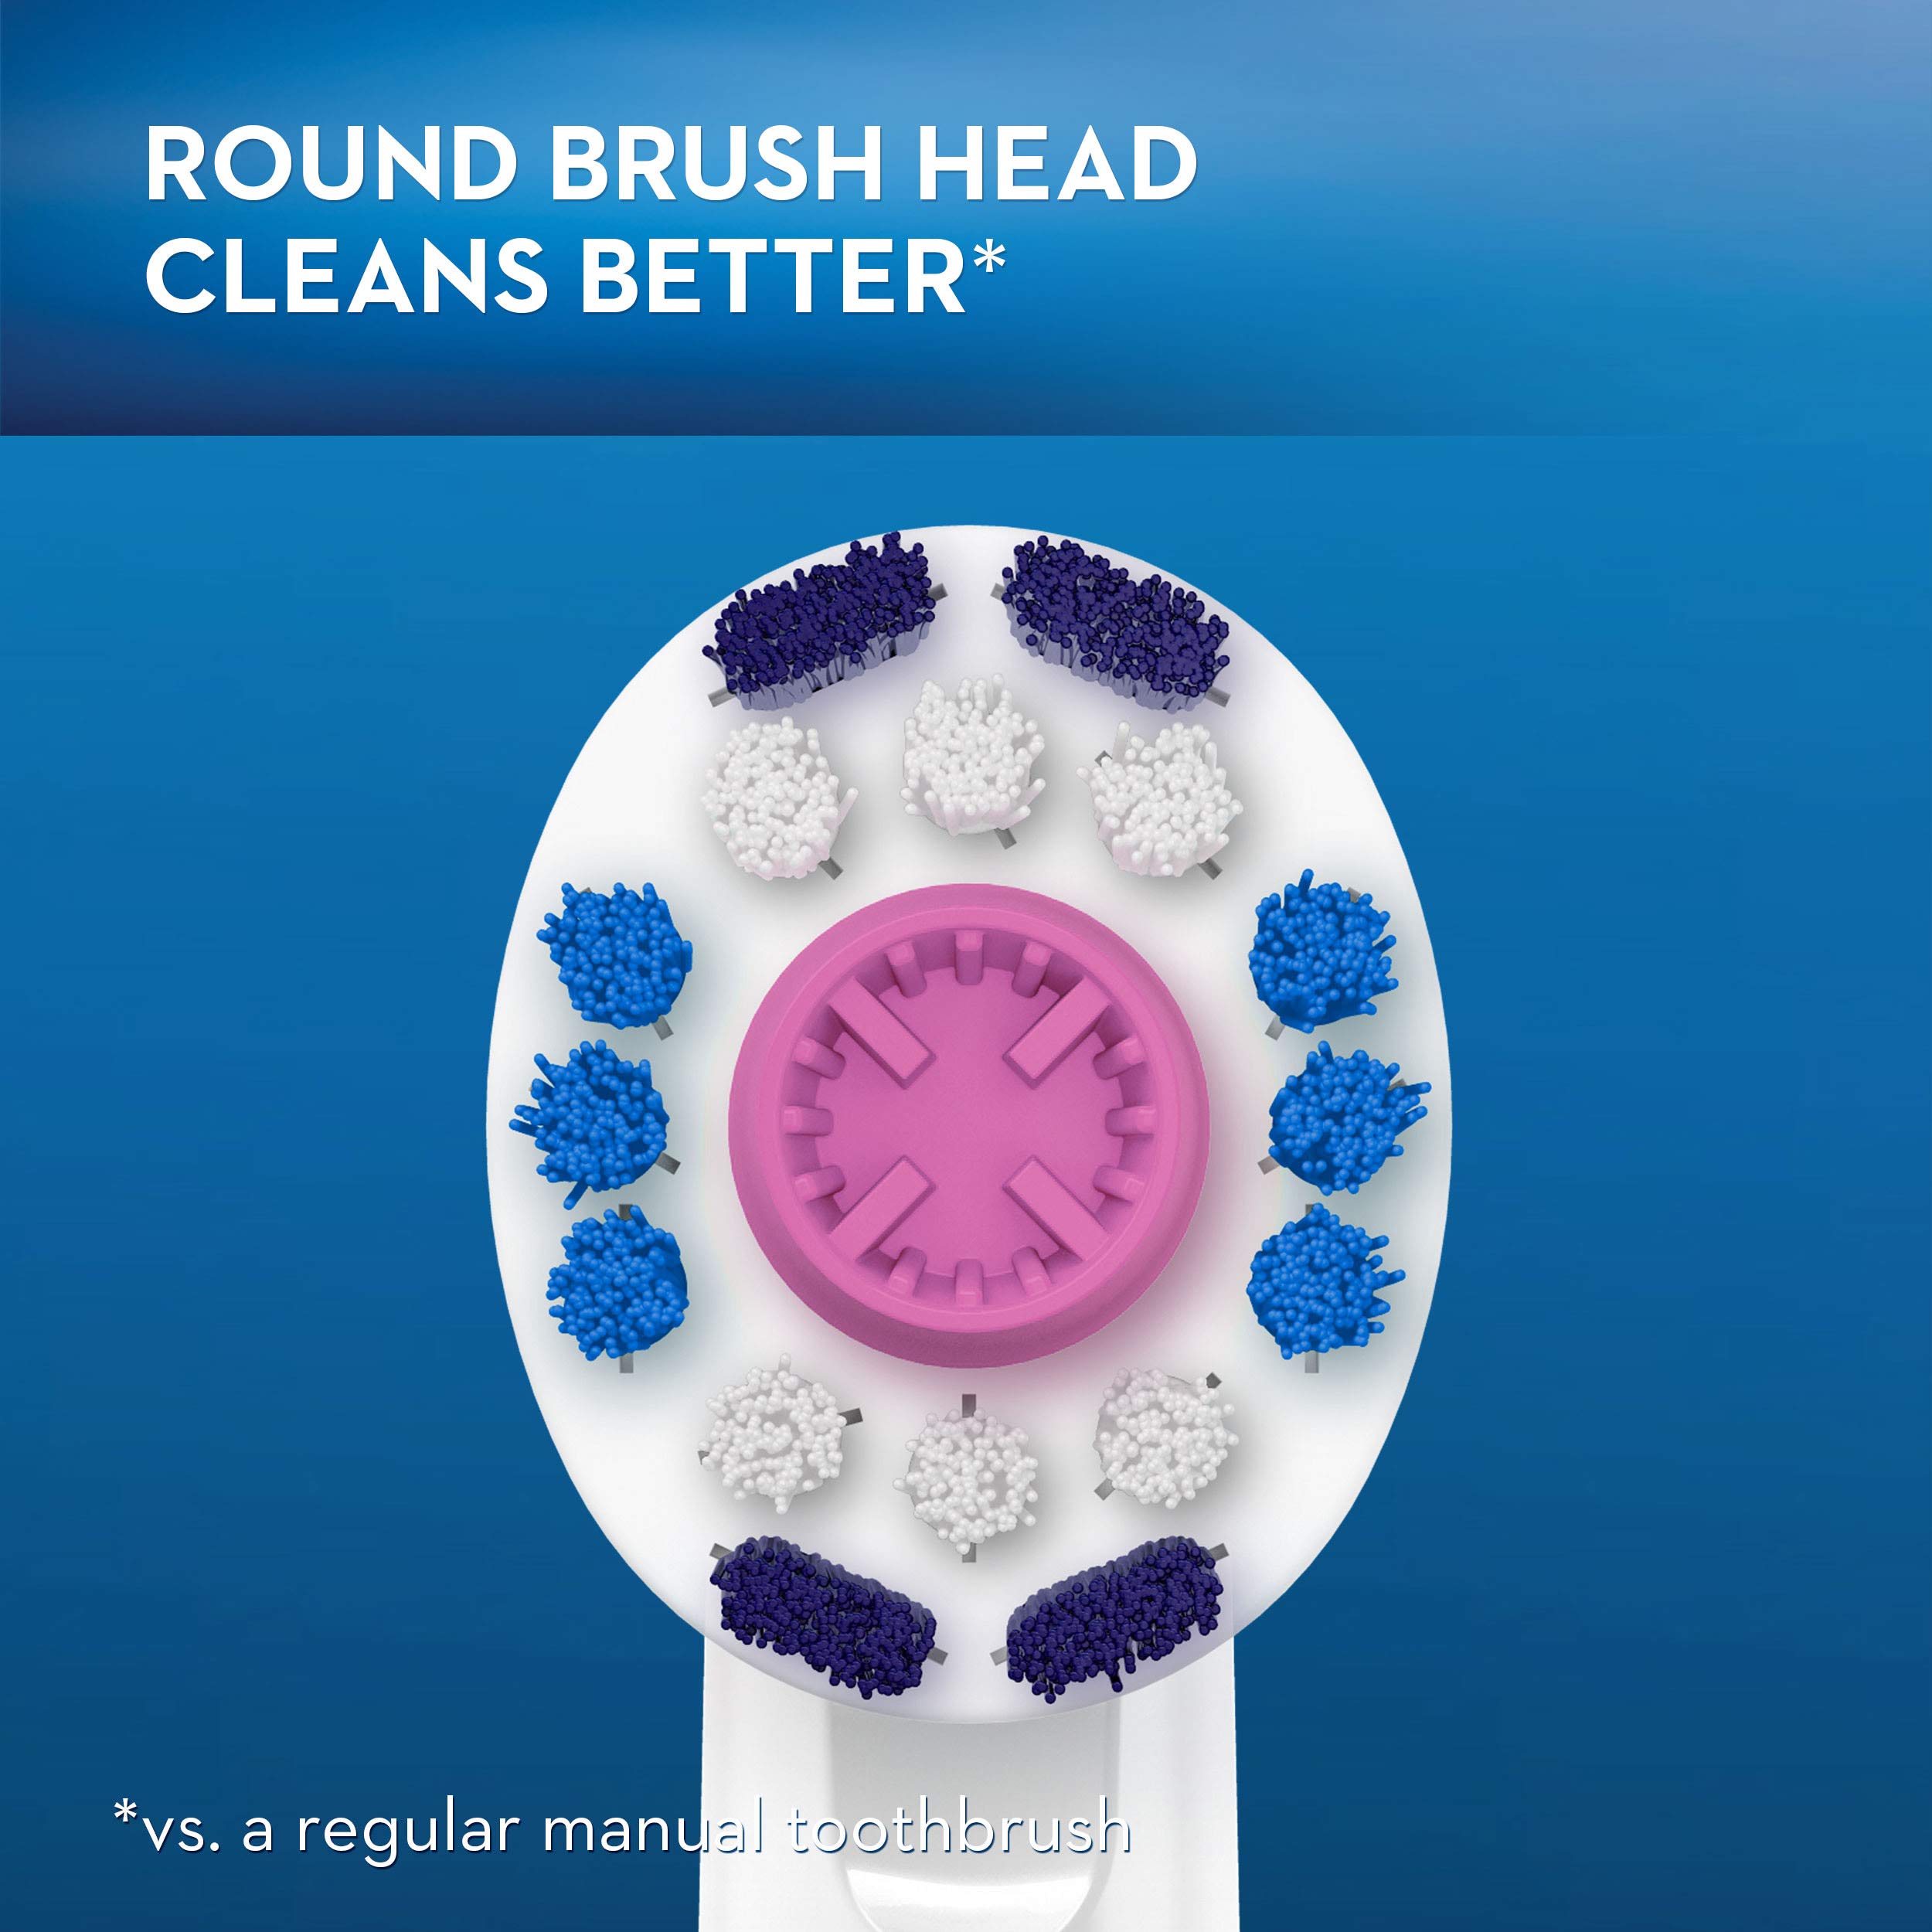 Oral-B 3D White Electric Toothbrush Replacement Brush Heads Refill, 3 Count